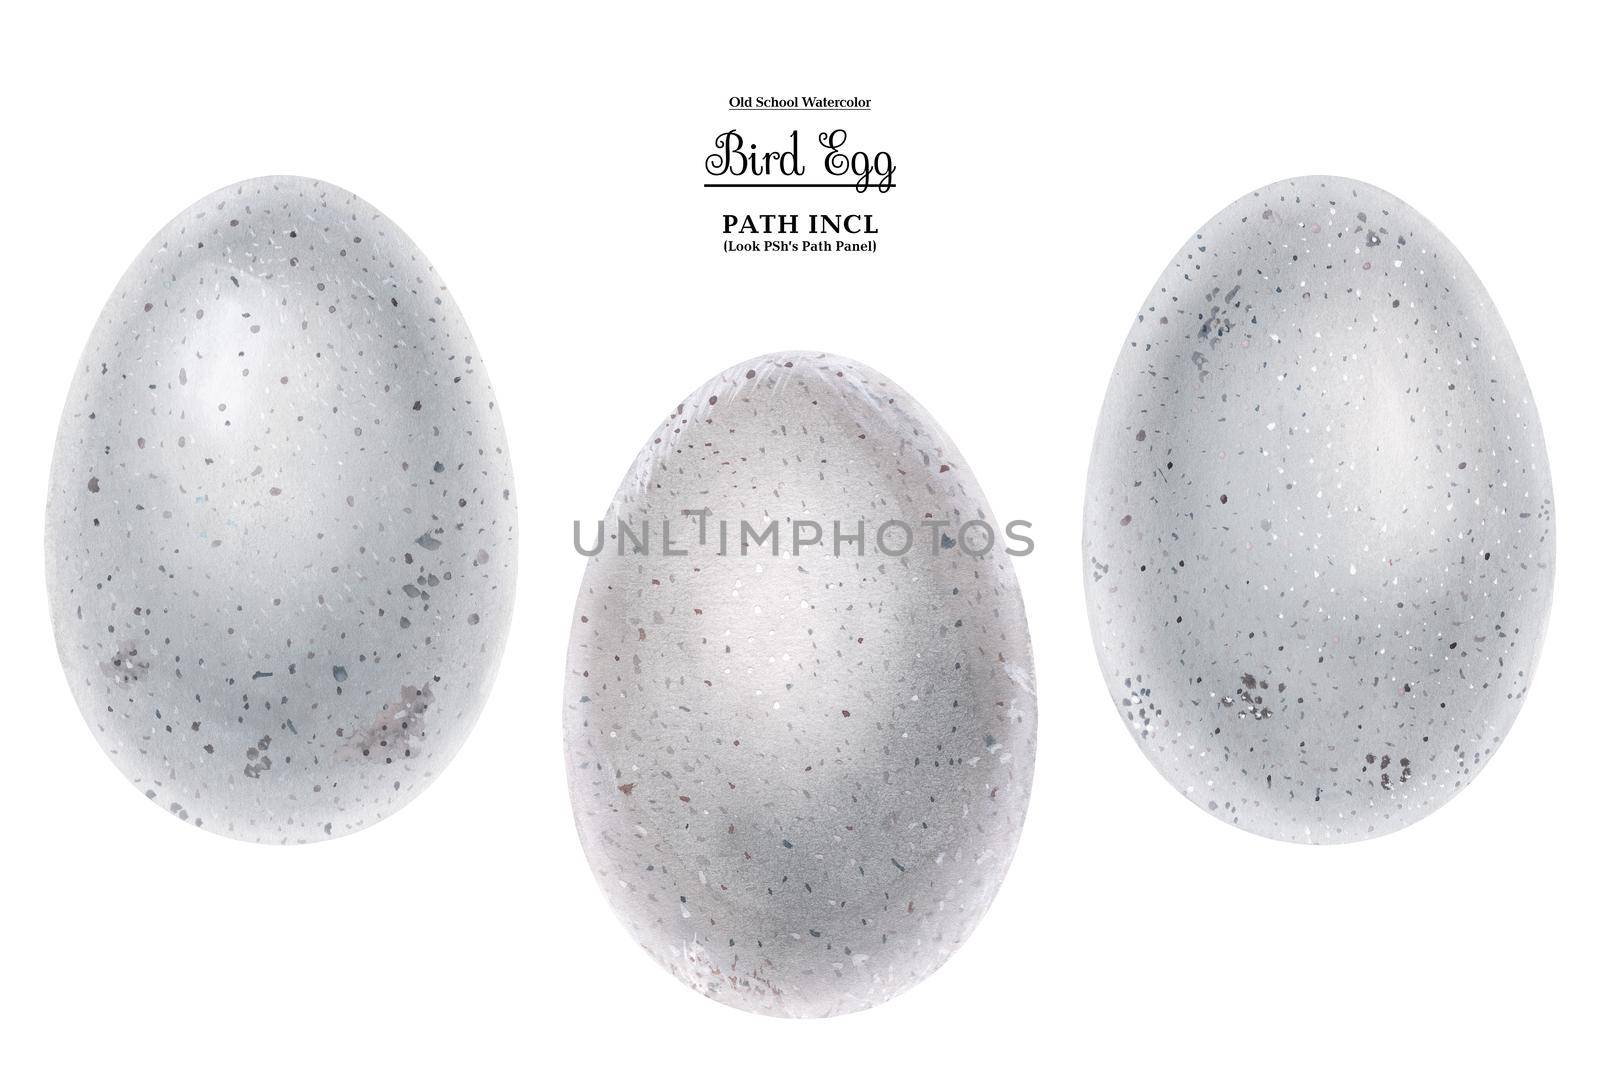 Realistic watercolor illustration Bird eggs. Isolated, path included